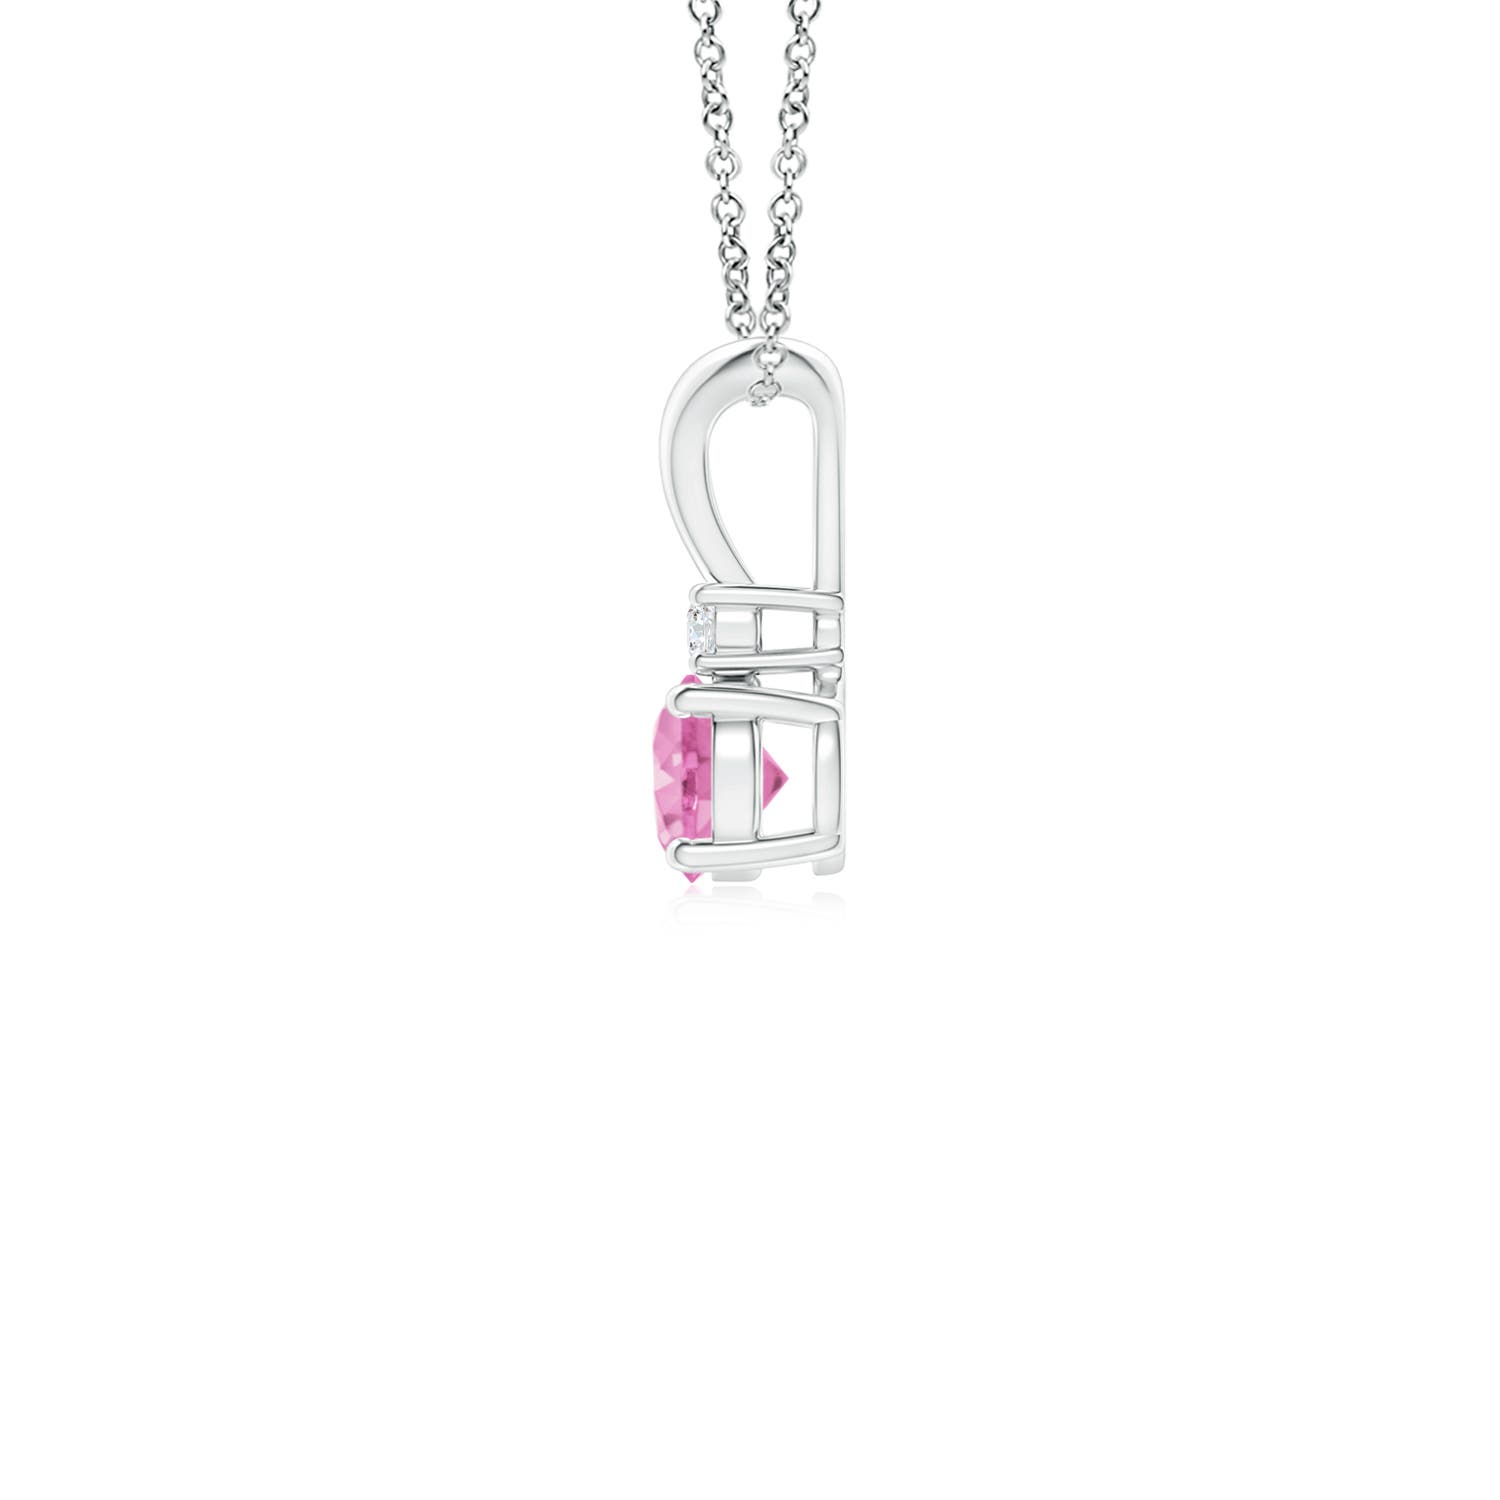 A - Pink Sapphire / 0.34 CT / 14 KT White Gold